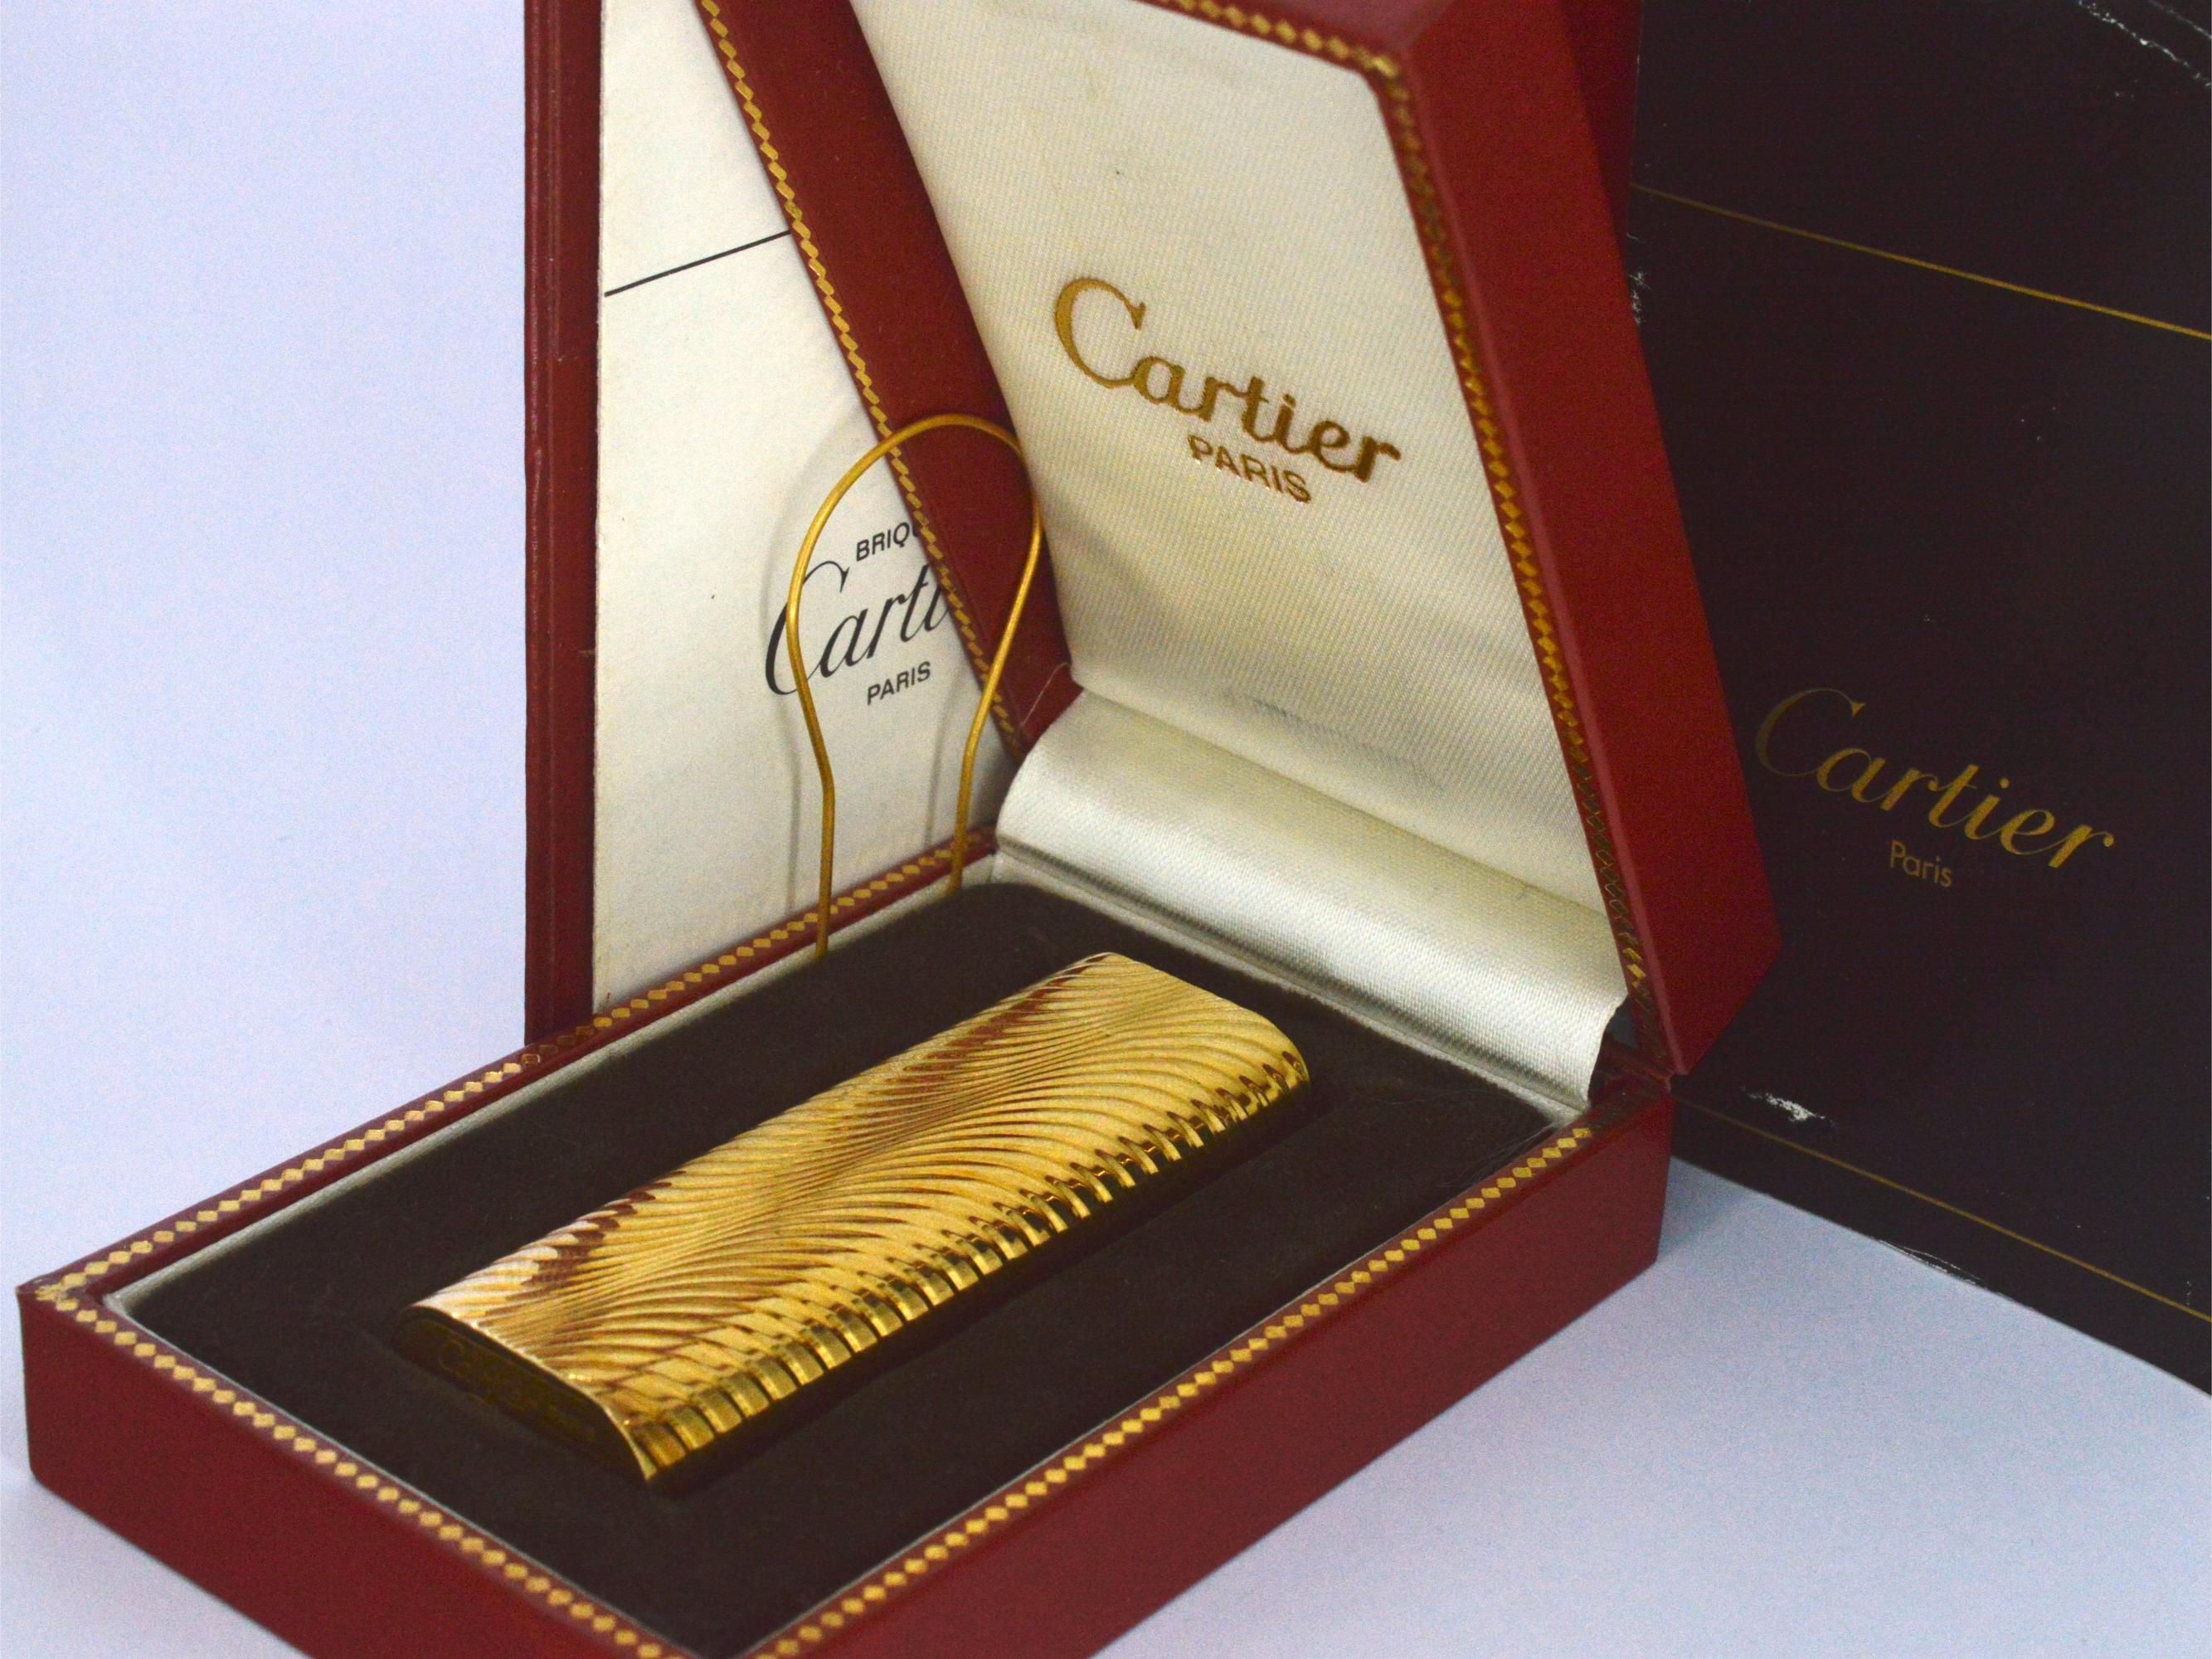 This vintage Cartier Paris lighter is an exquisite piece of jewelry weighing 88.3 grams. It is gold-plated, showcasing a timeless design that exudes elegance. Despite its vintage status, it is in good working condition, perfect for collectors and